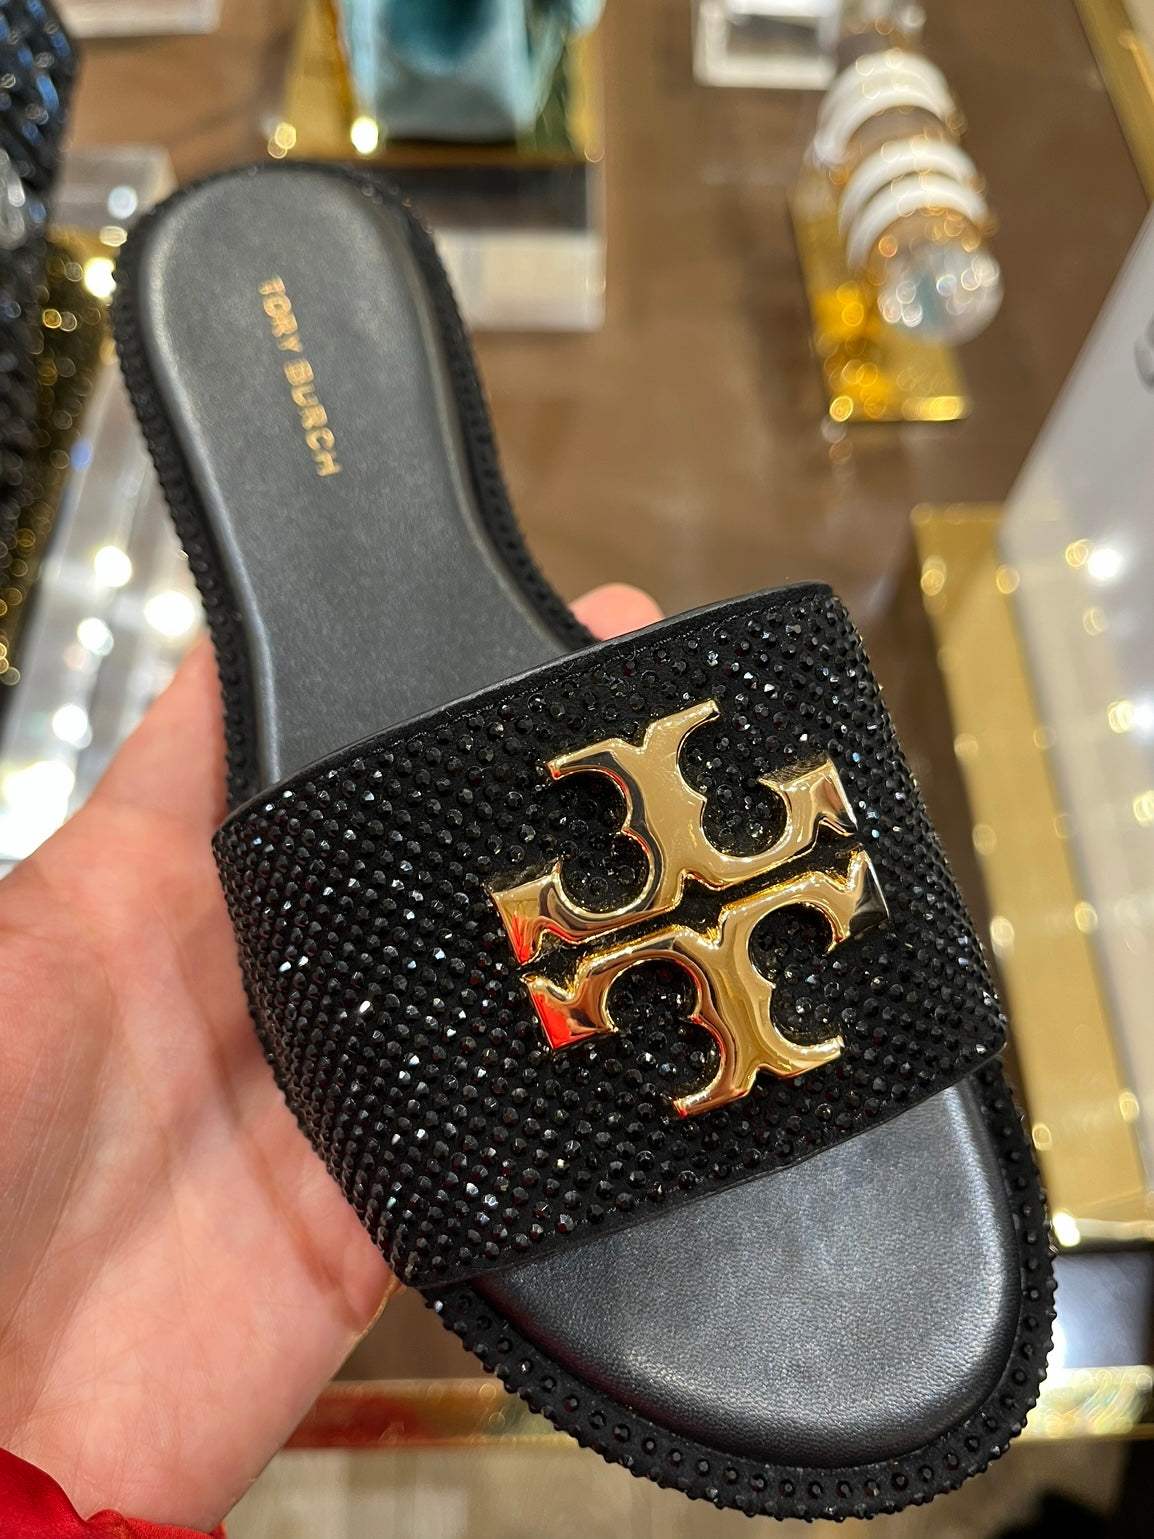 Tory Burch Everly Slide, Royal Suede, Crystal, Perfect Black /Gold, Style 151402